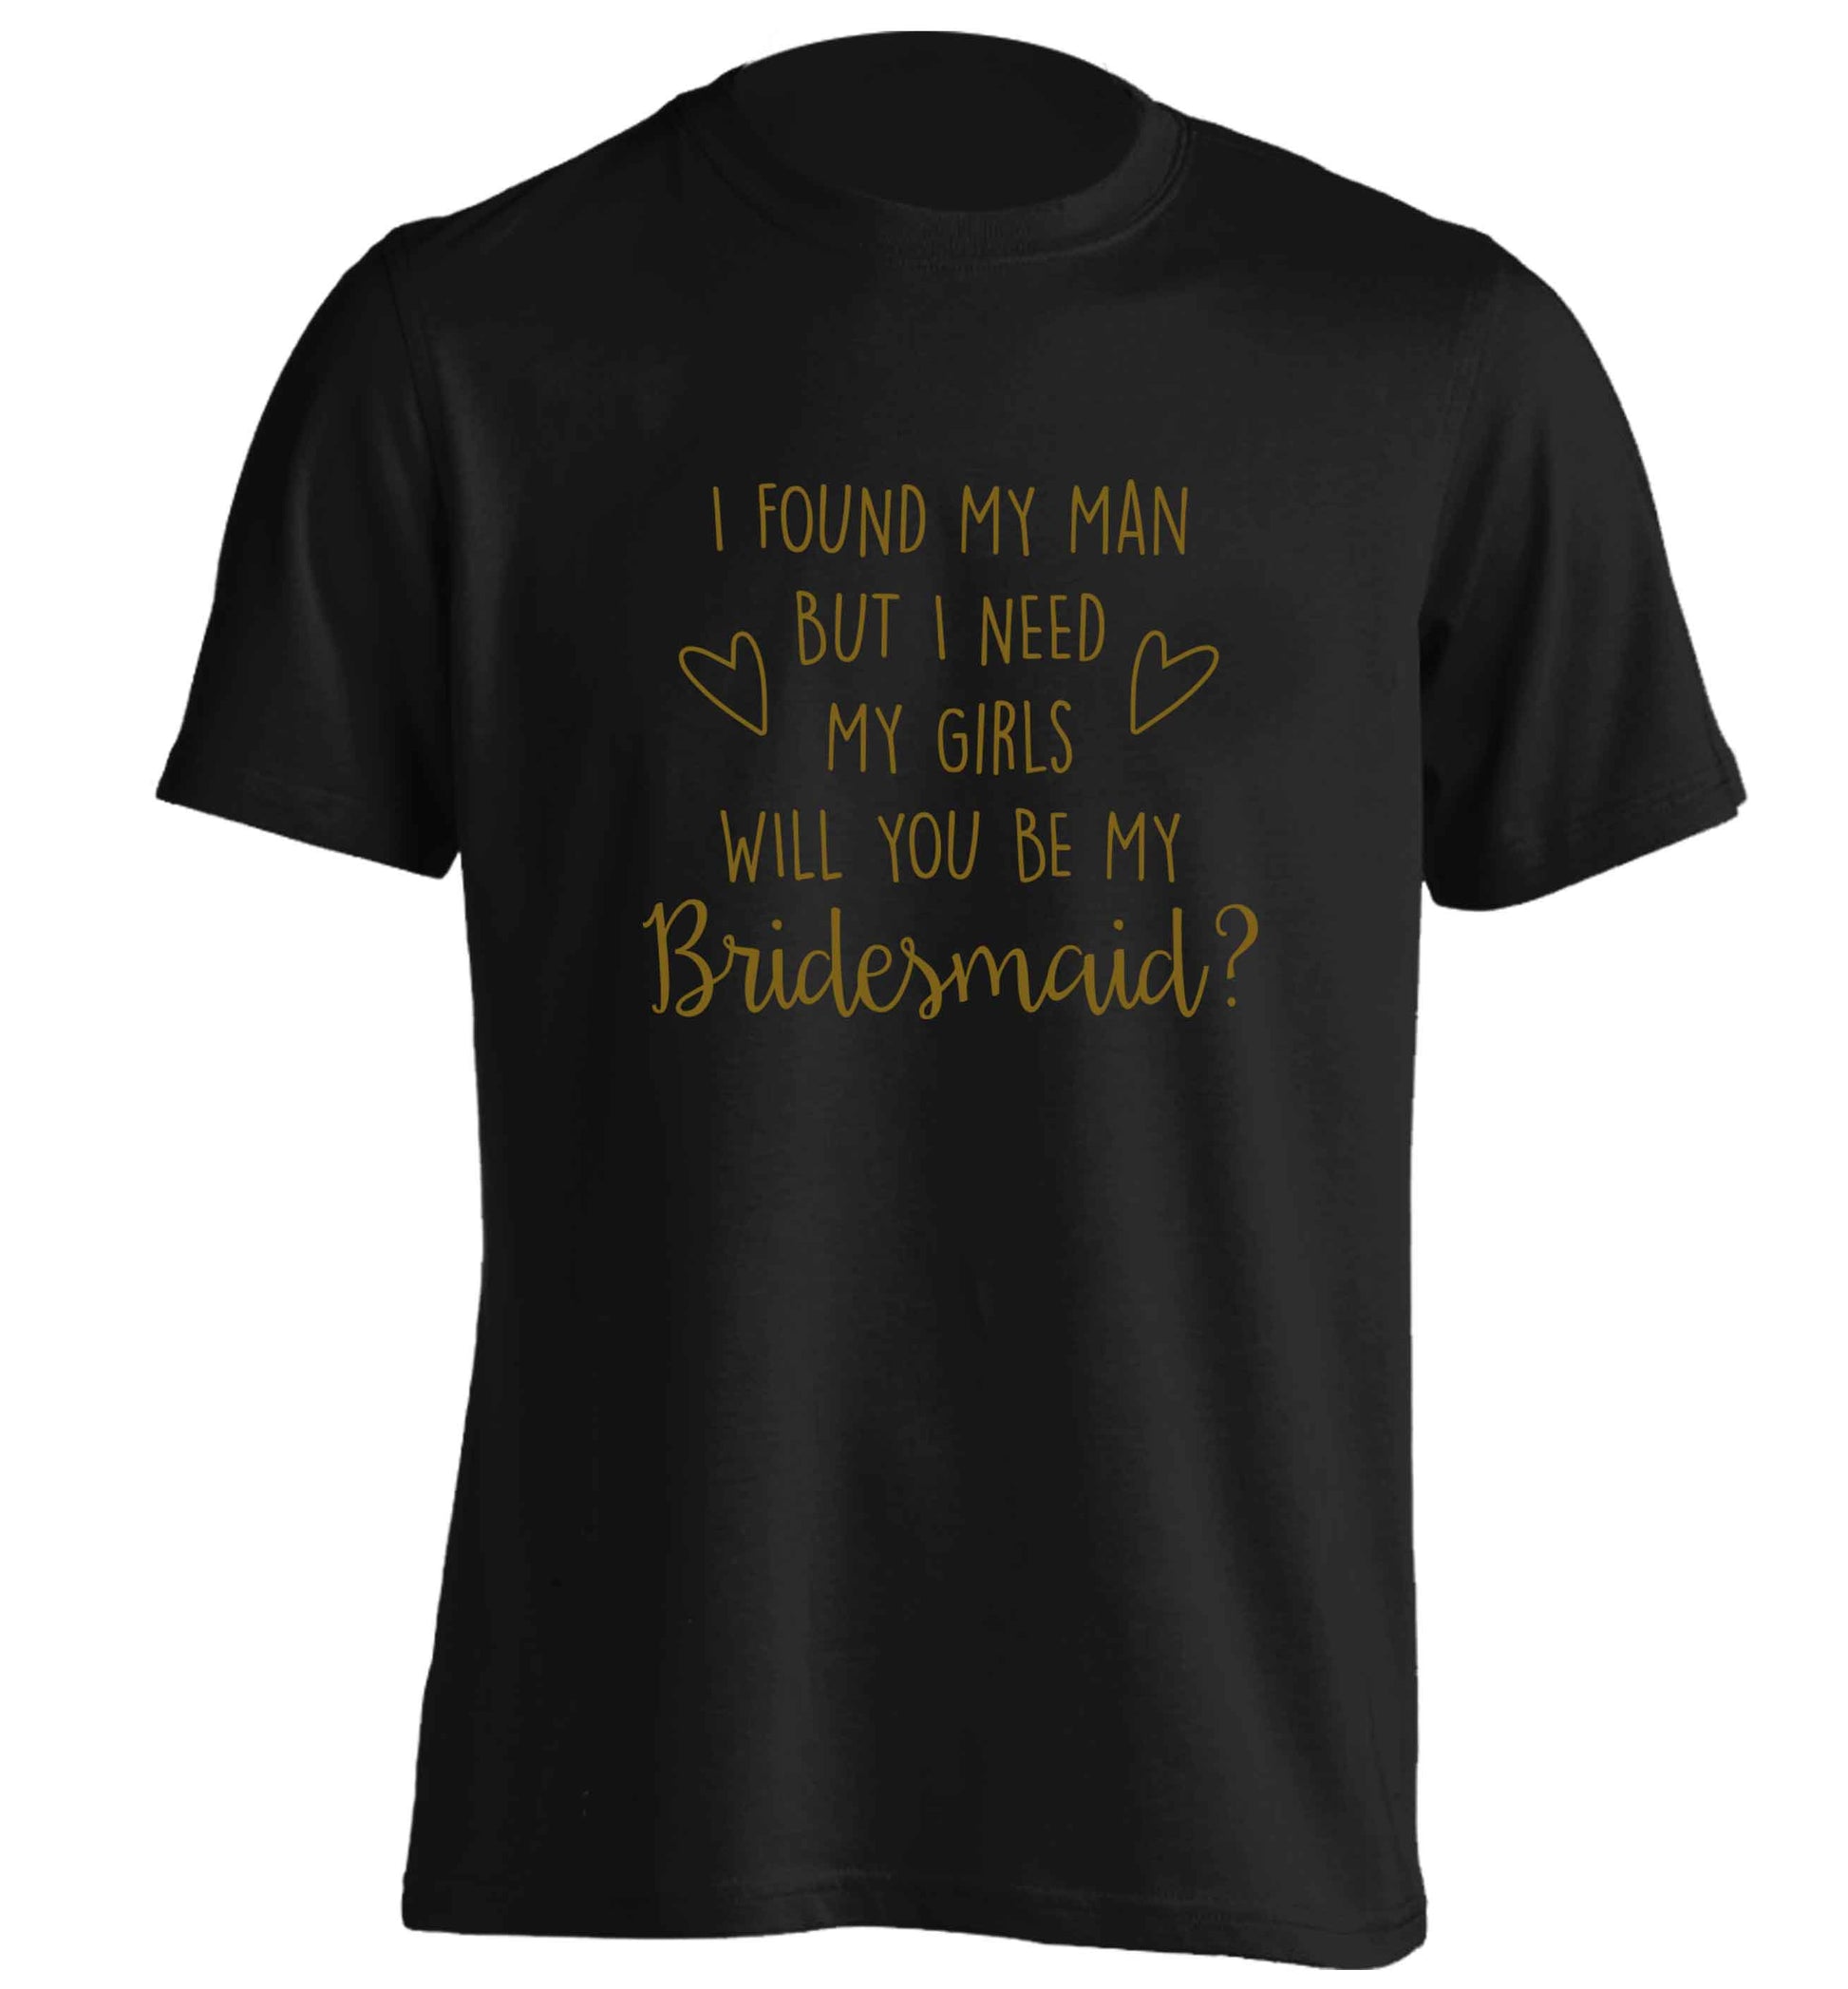 I found my man but I need my girls will you be my bridesmaid? adults unisex black Tshirt 2XL